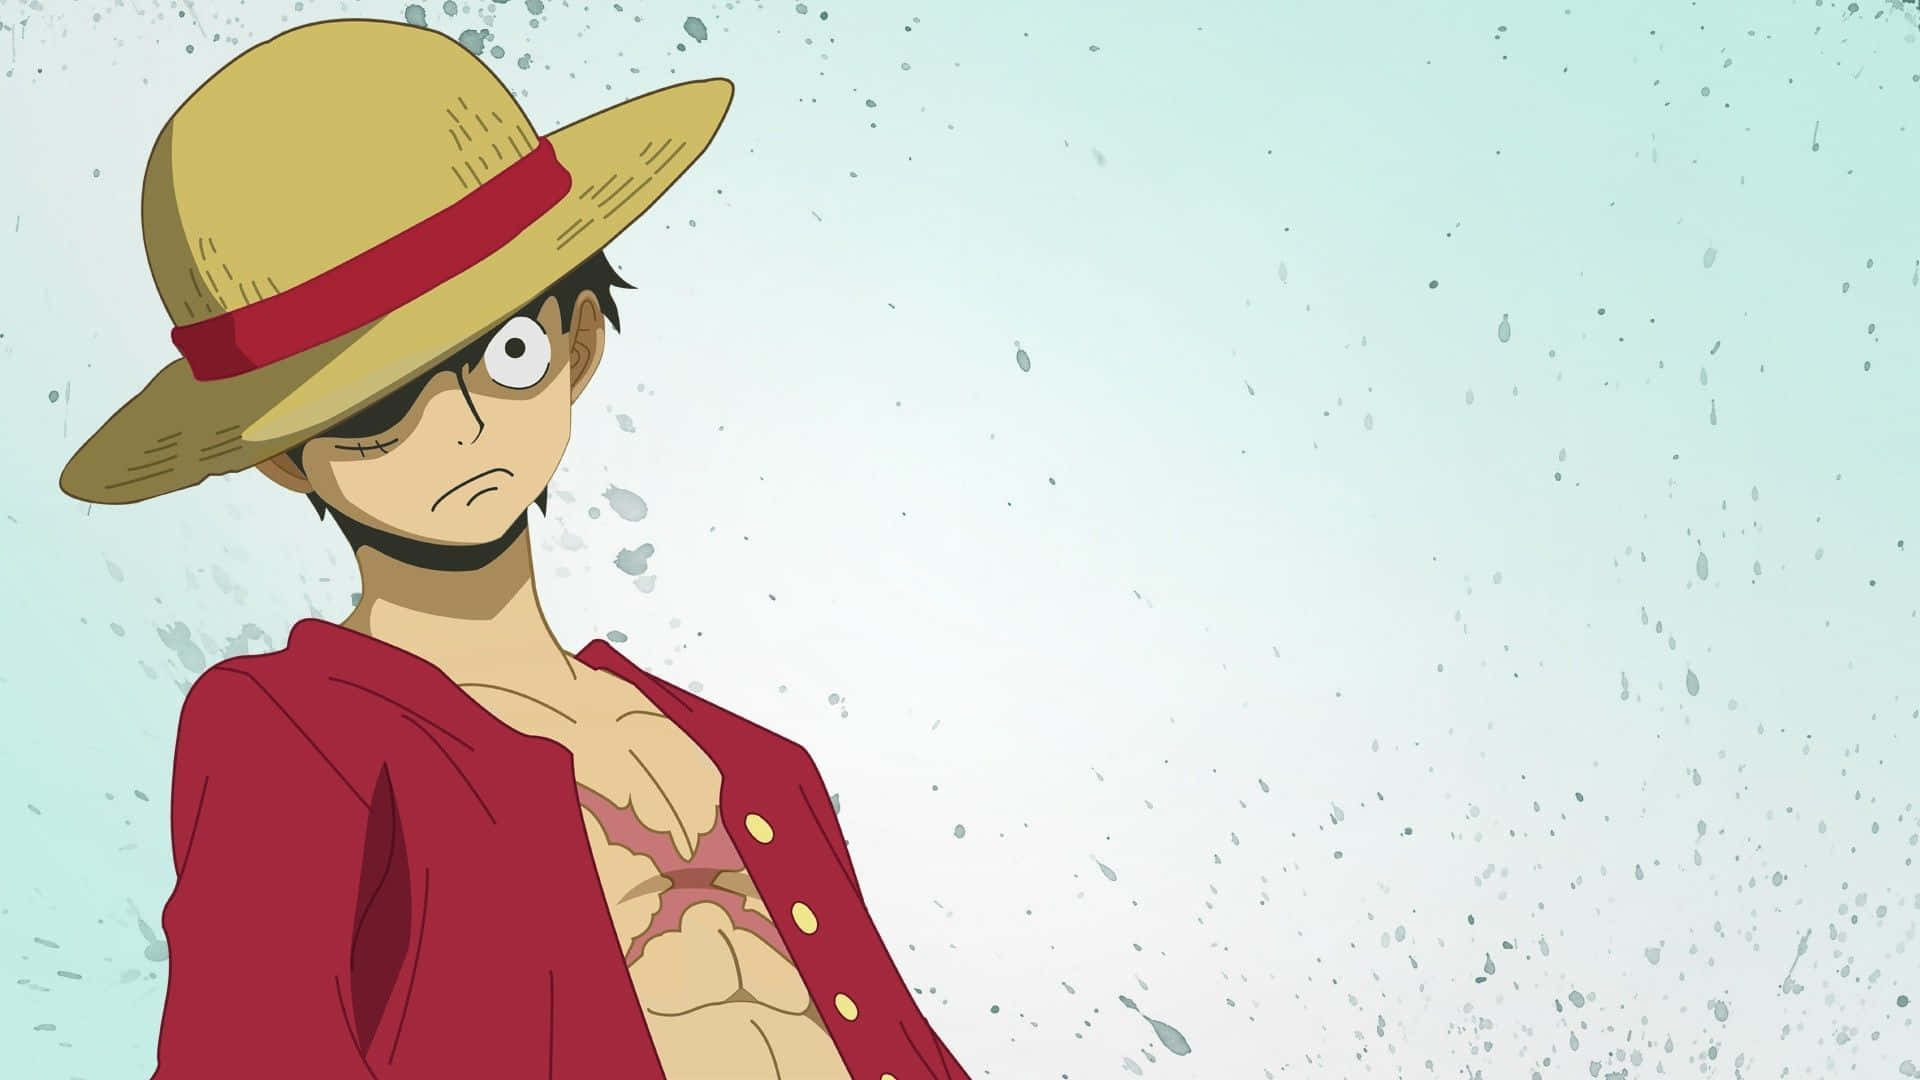 Cool Luffy Looks Ready To Take On The World! Background